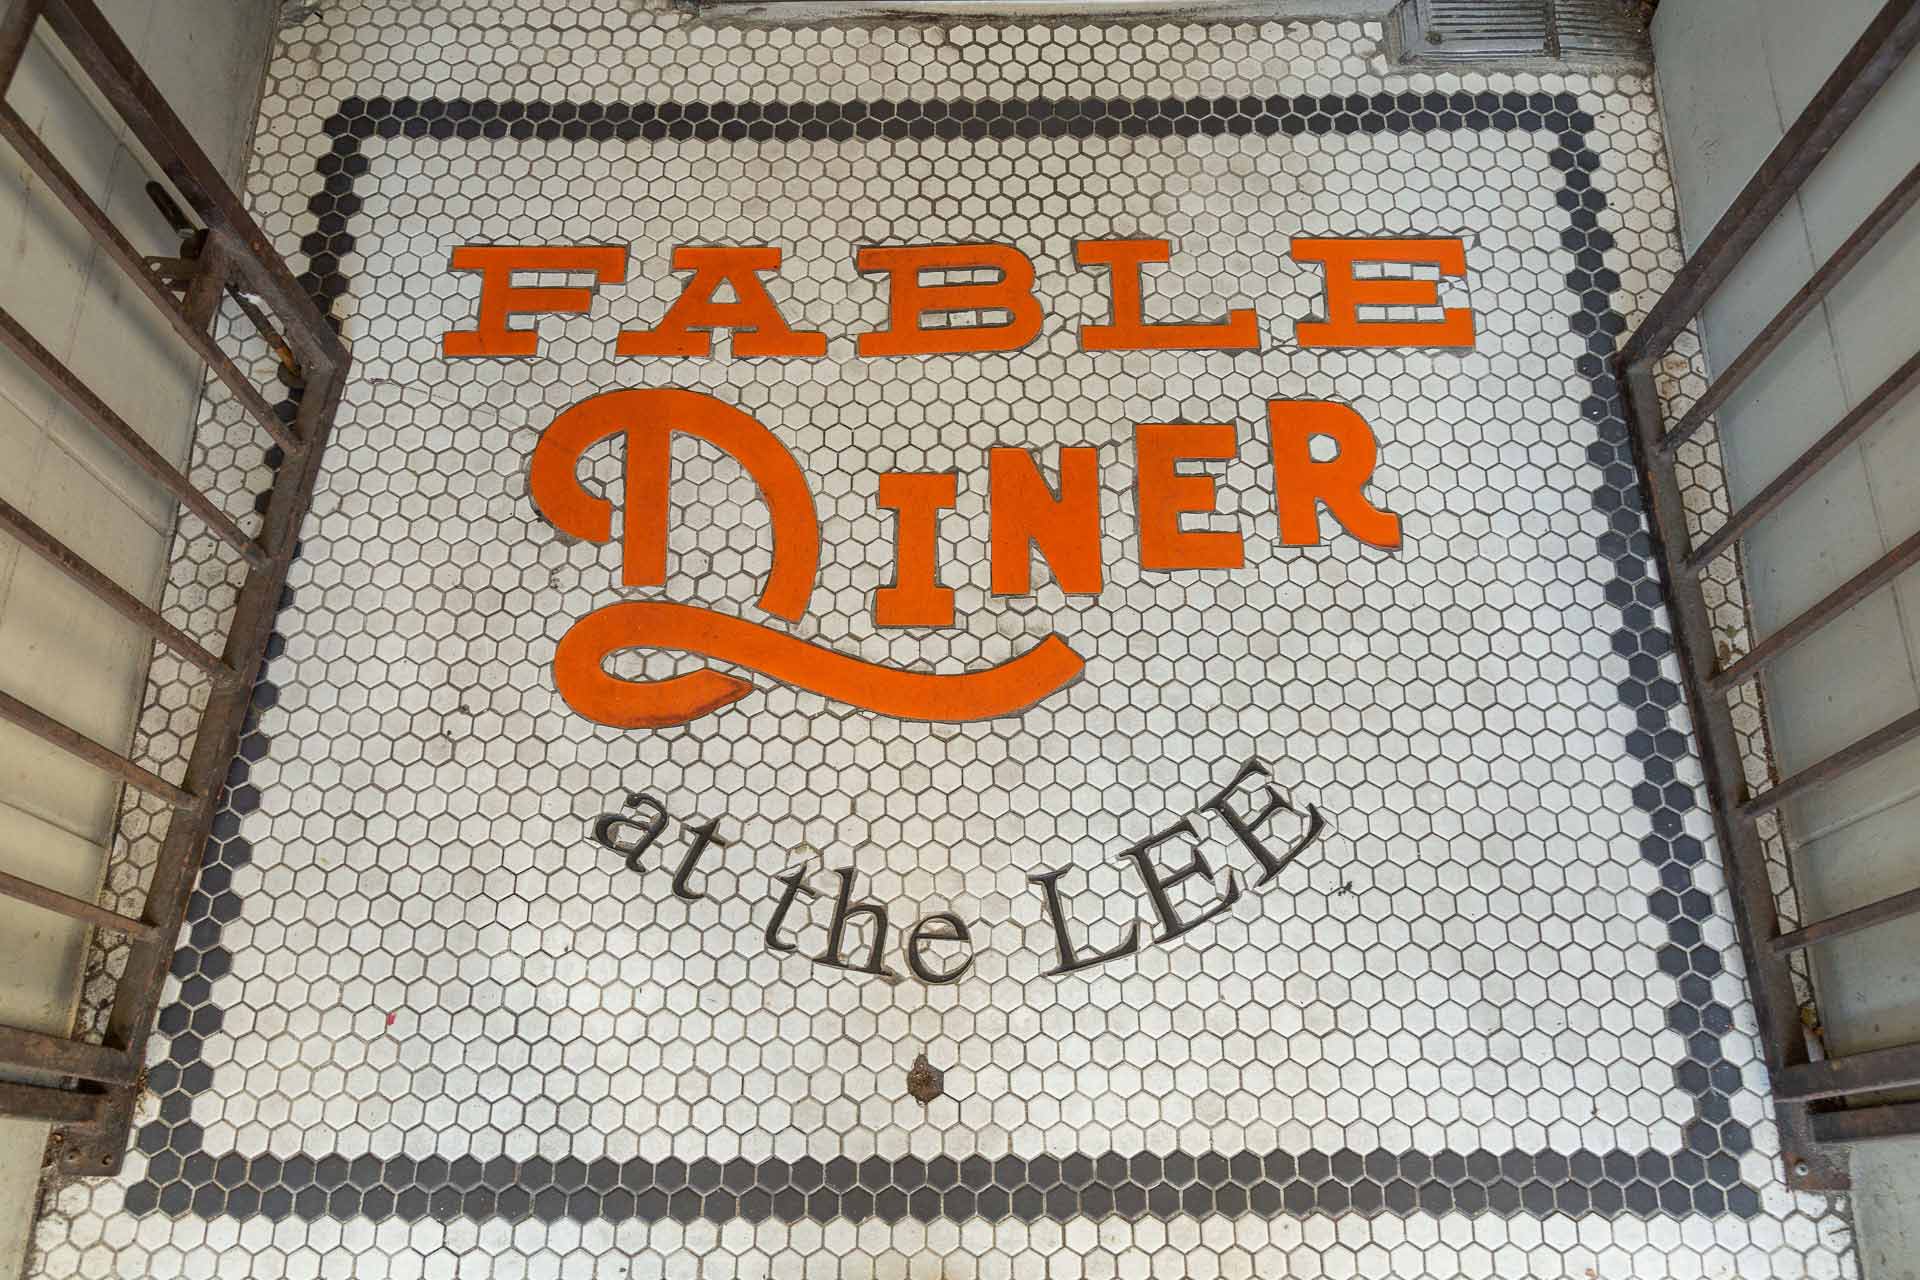 Fable Diner